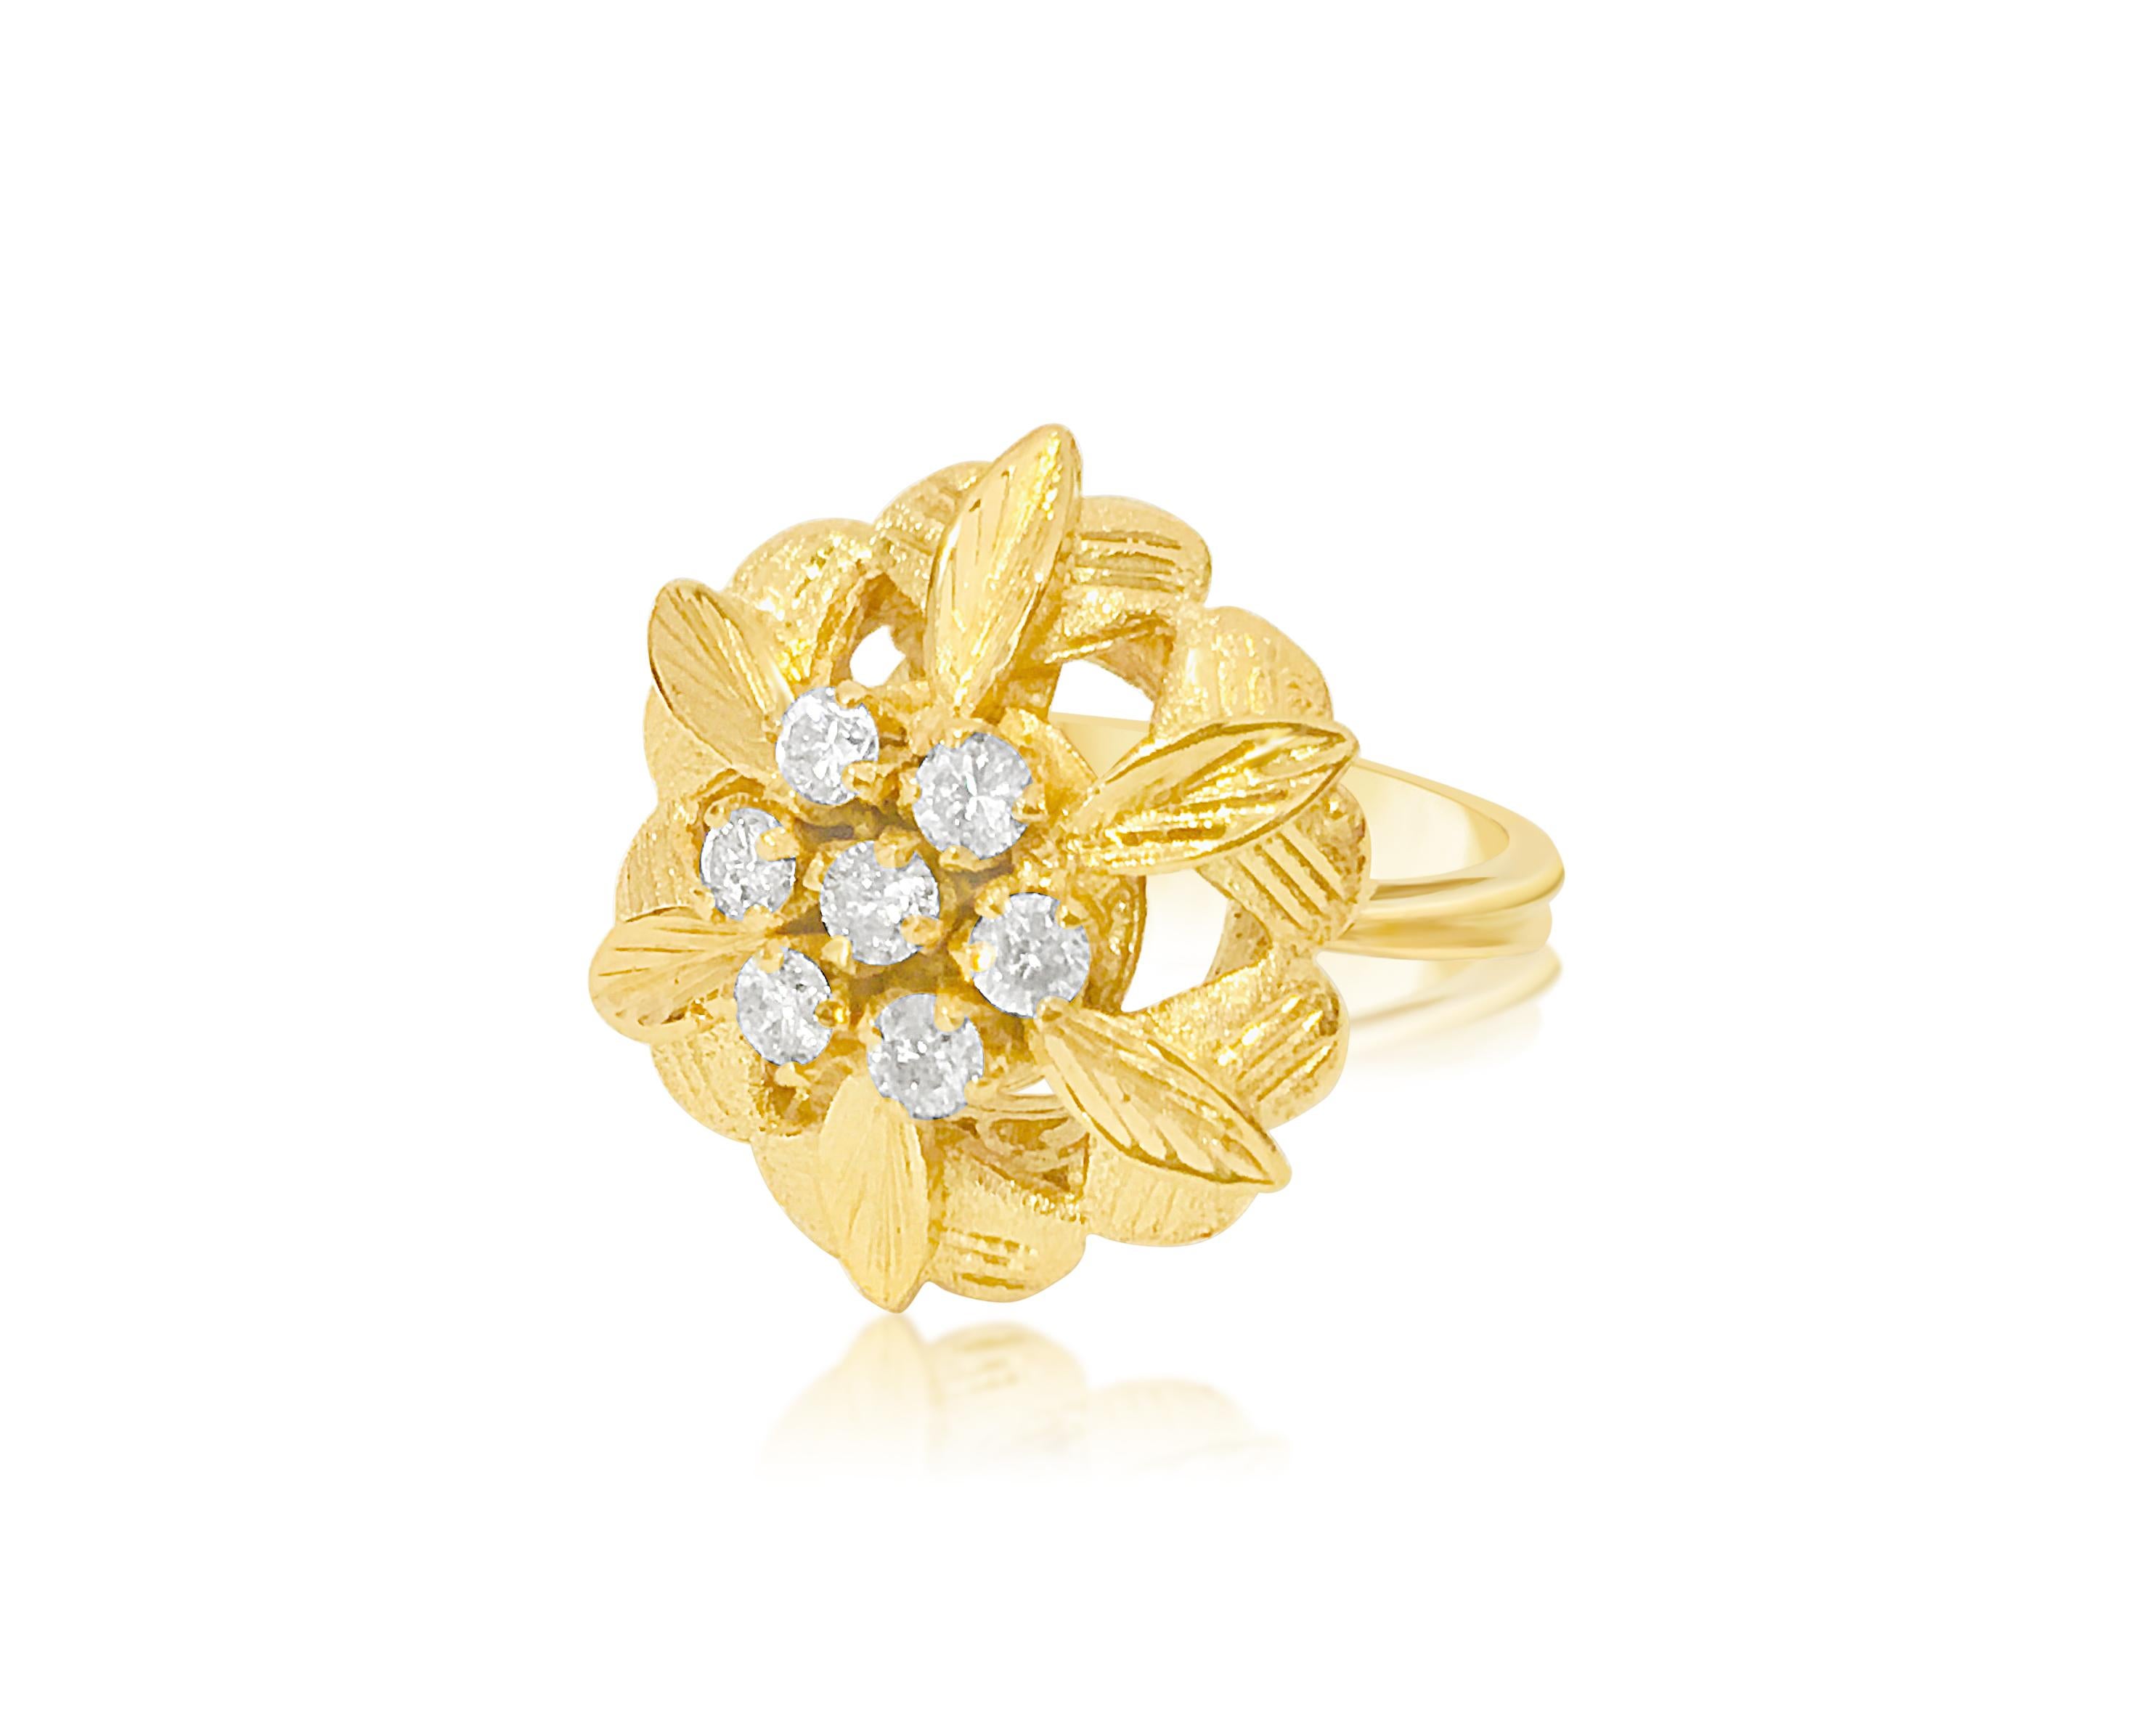 Vintage Open Flower Ladies Diamond & Gold Ring In Excellent Condition For Sale In Miami, FL